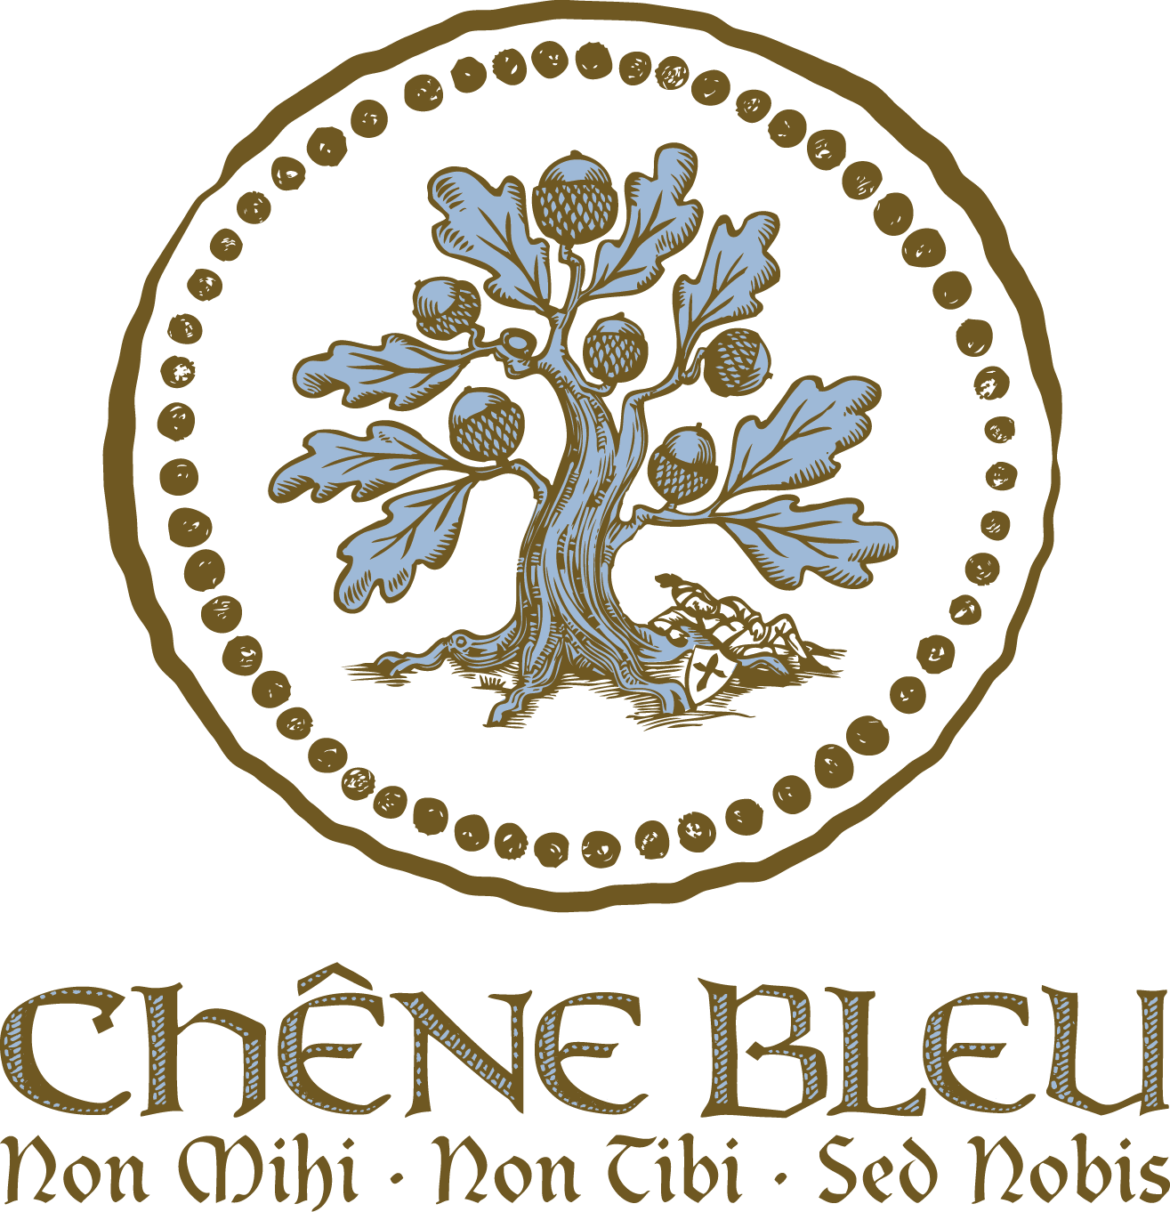 Chêne Bleu Organic Wines Is Giving Thanks this November with a Pop-Up Tasting Room & Wine Shop